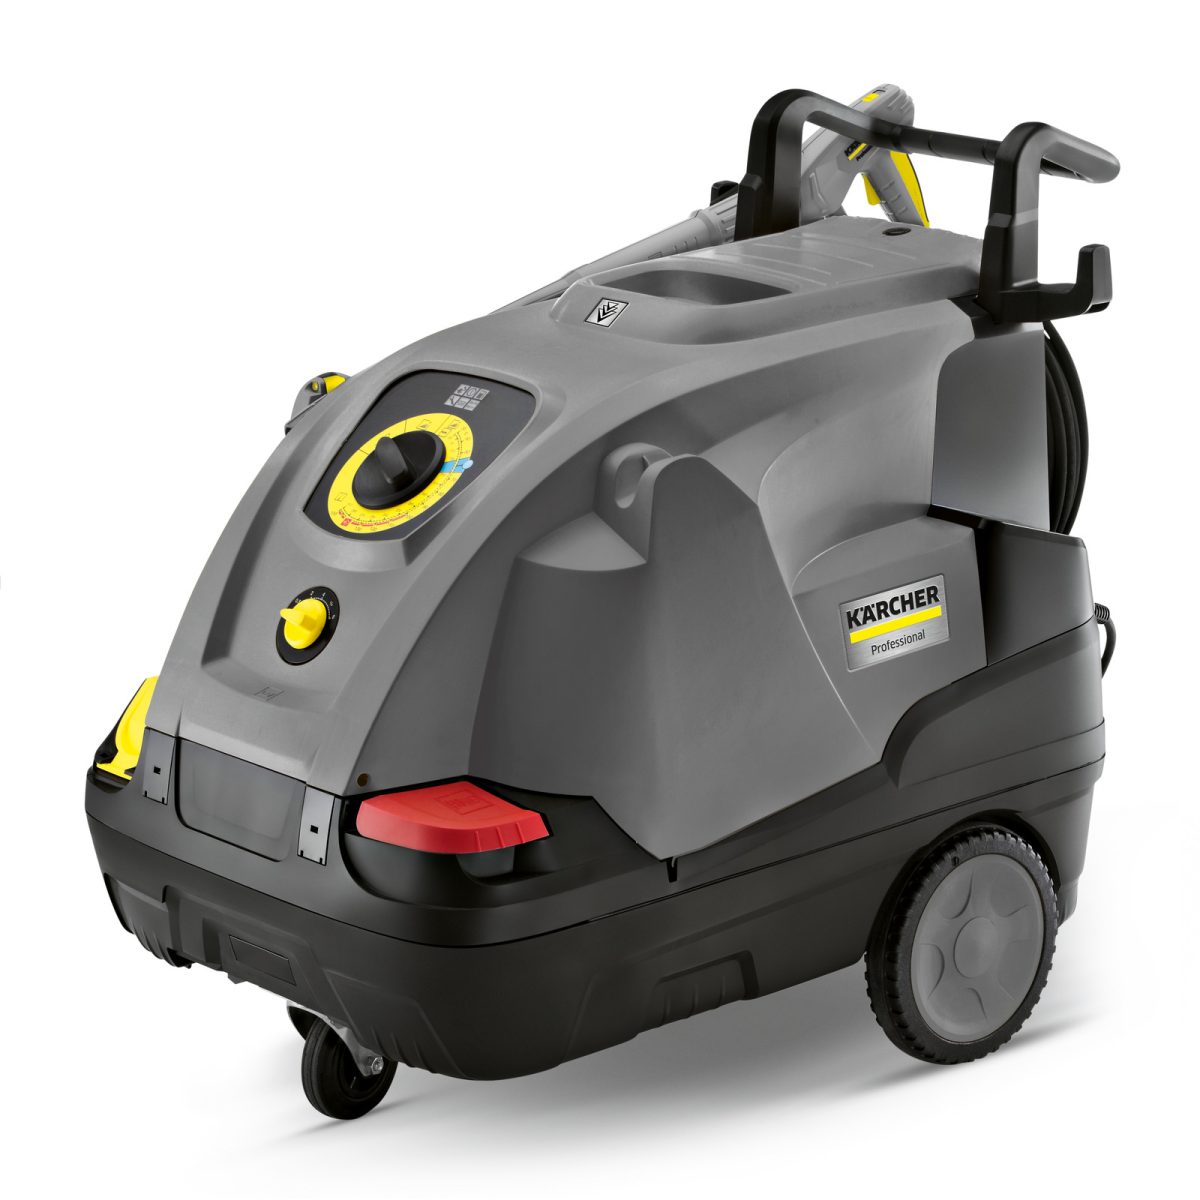 HDS 6/12 C - Hot Water Pressure Washer